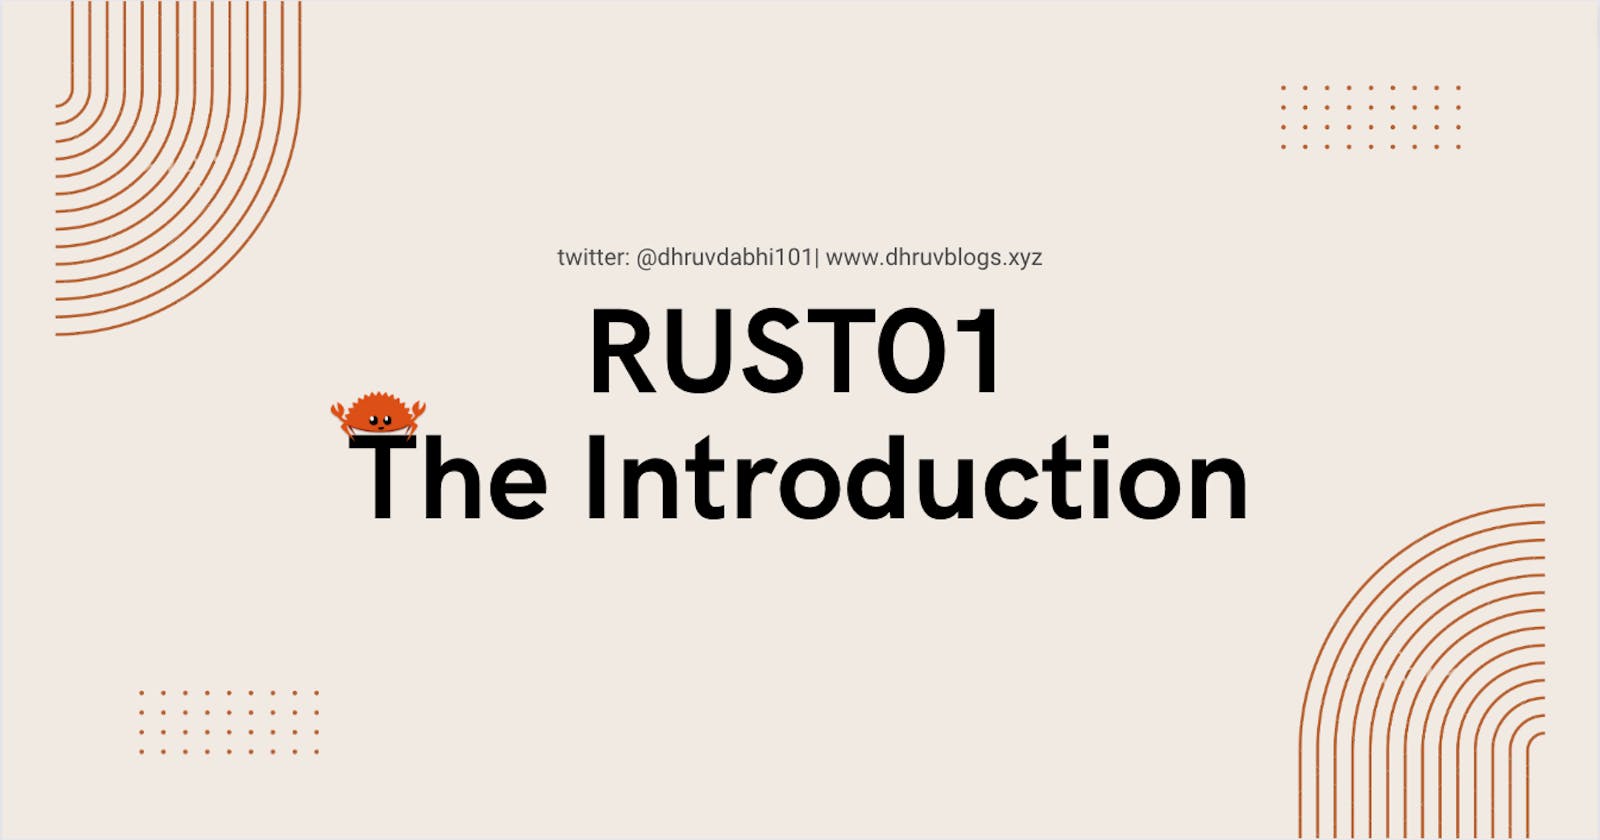 Rust01 : The Introduction